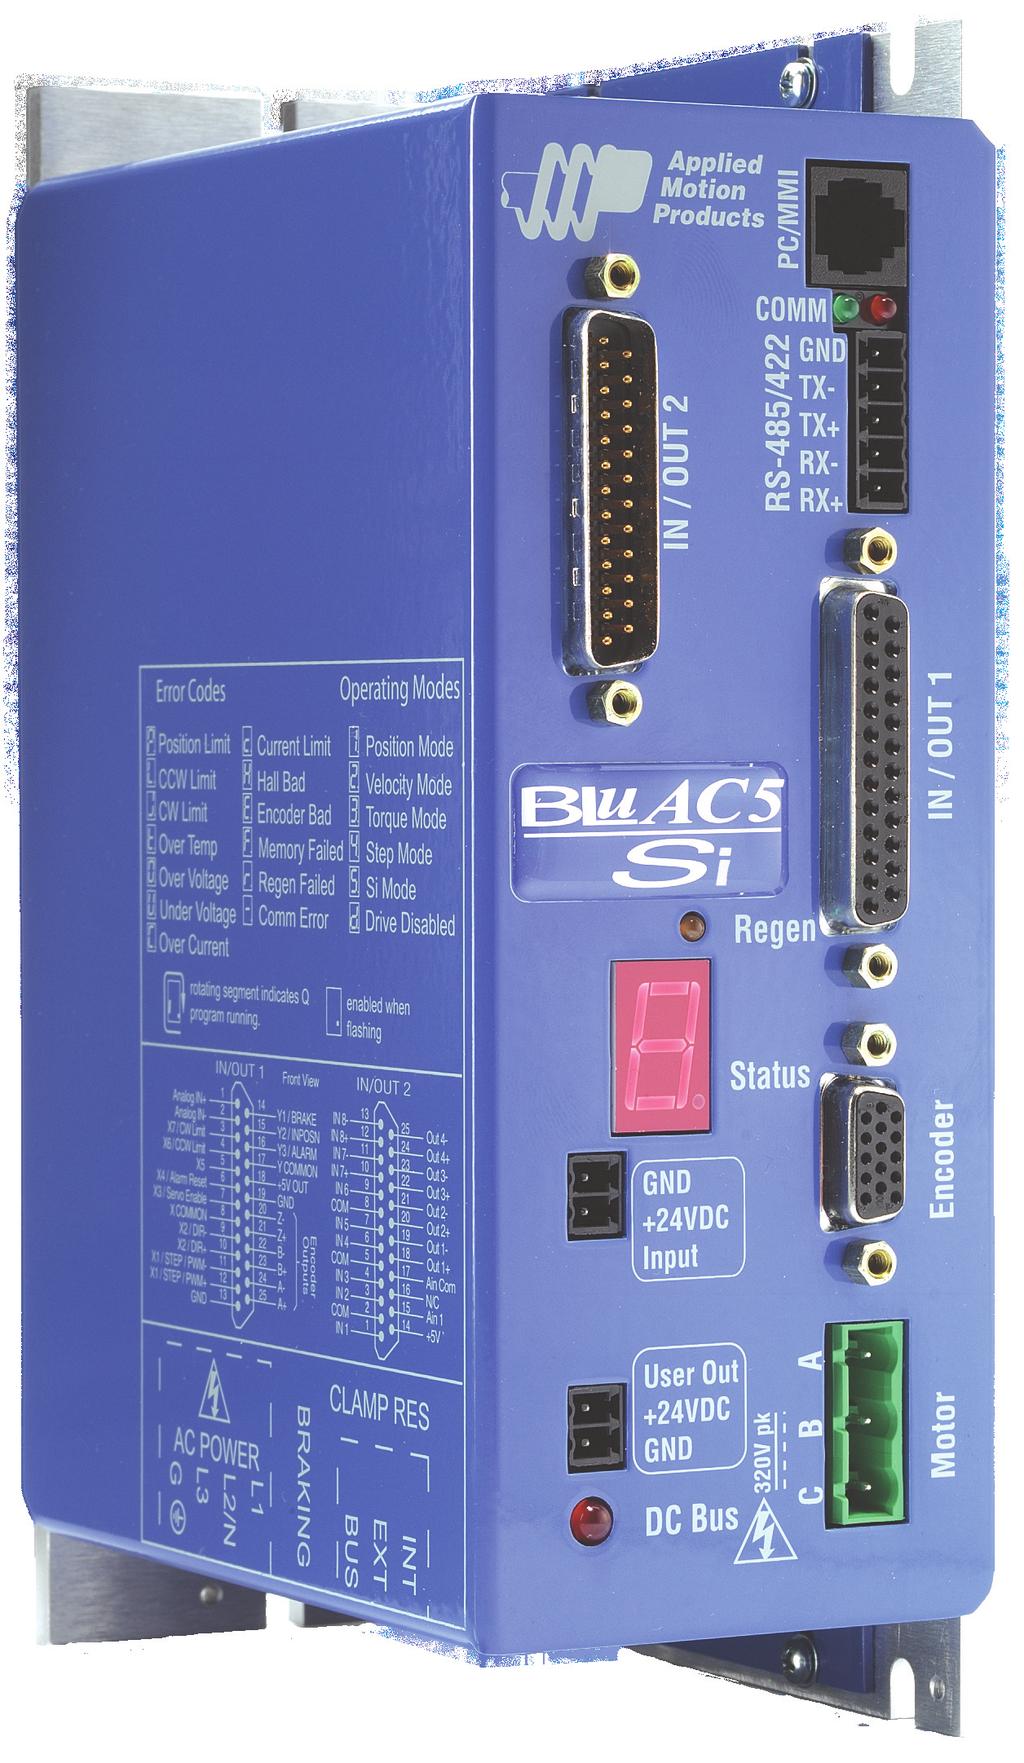 BLuAC5 Brushless Universal Servo Amplifier Description The BLu Series servo drives provide compact, reliable solutions for a wide range of motion applications in a variety of industries.